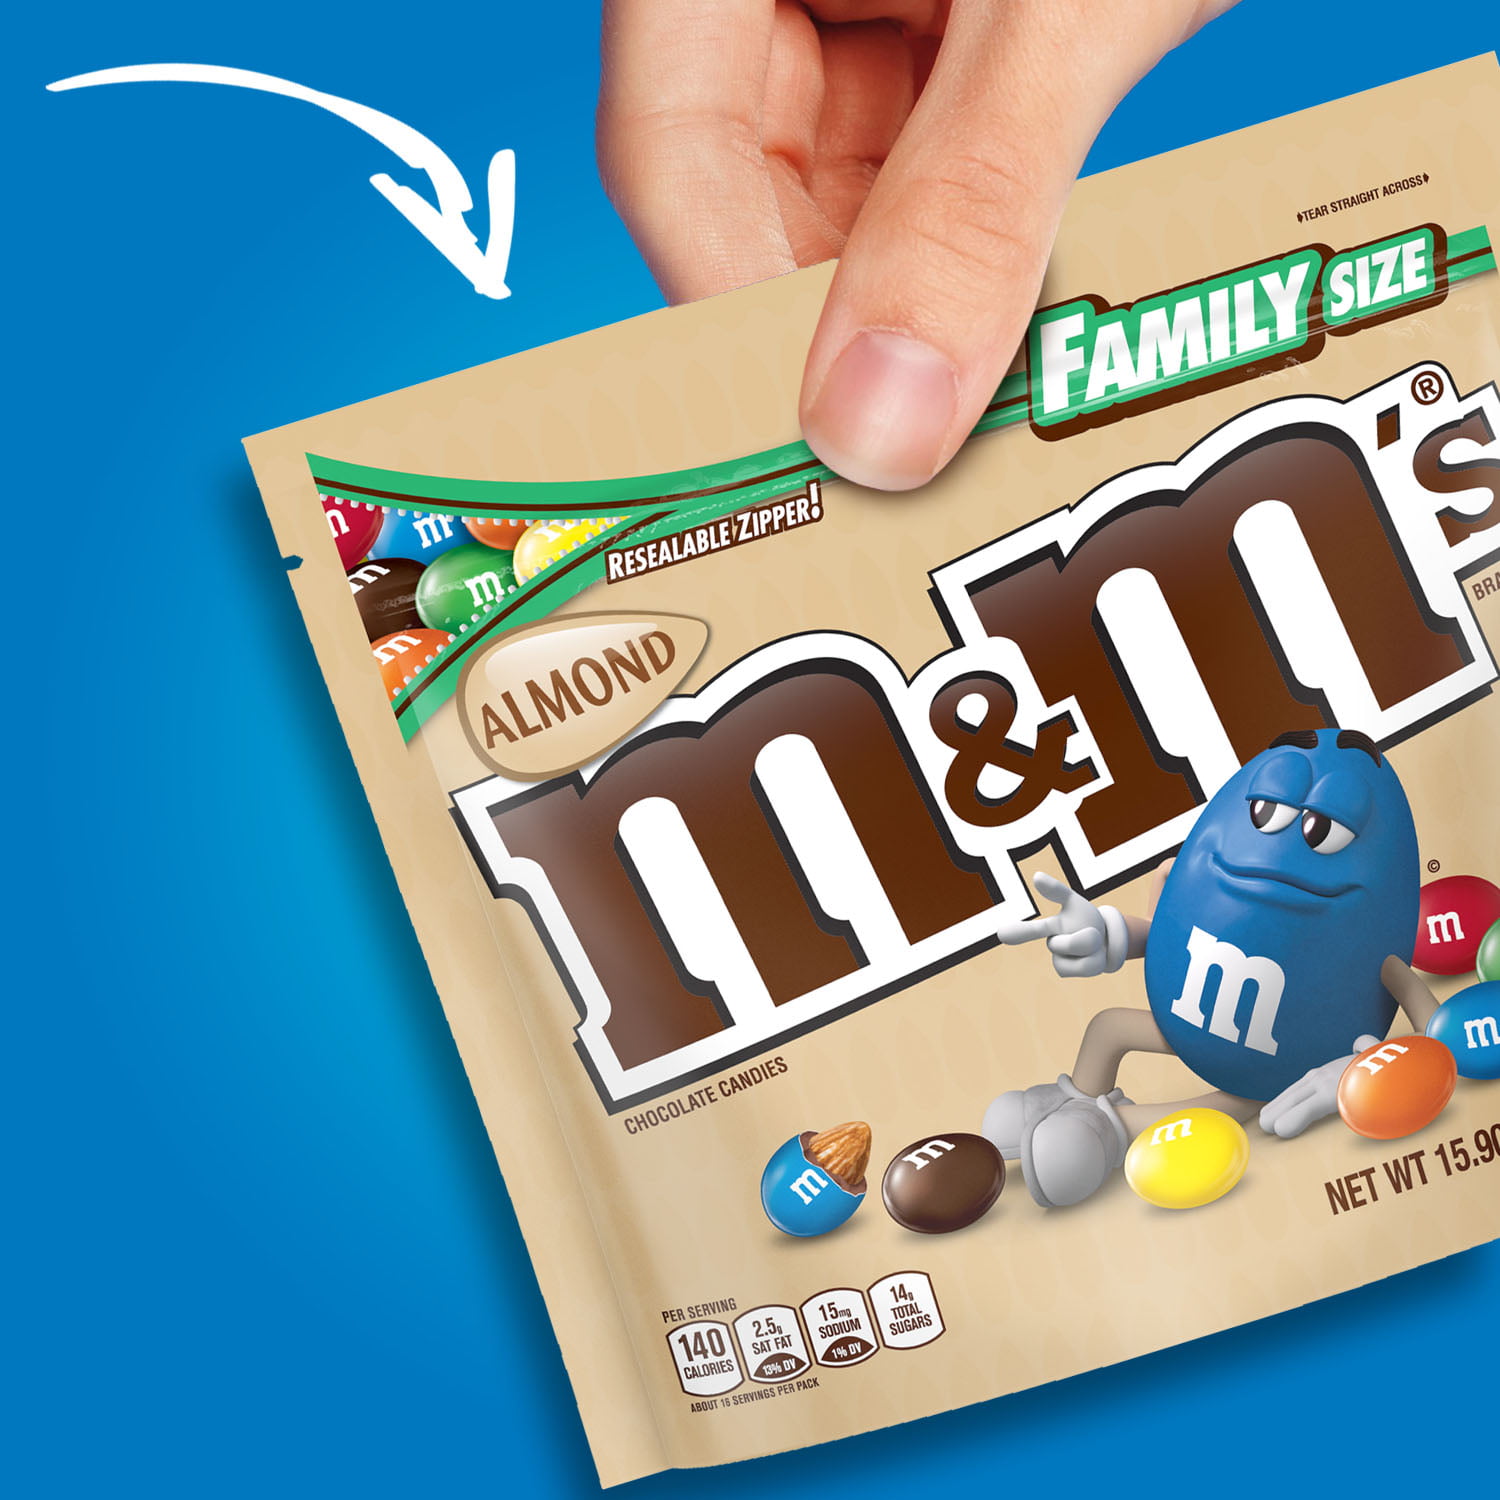 M&M'S Almond Milk Chocolate Candy - Share Size - Shop Candy at H-E-B